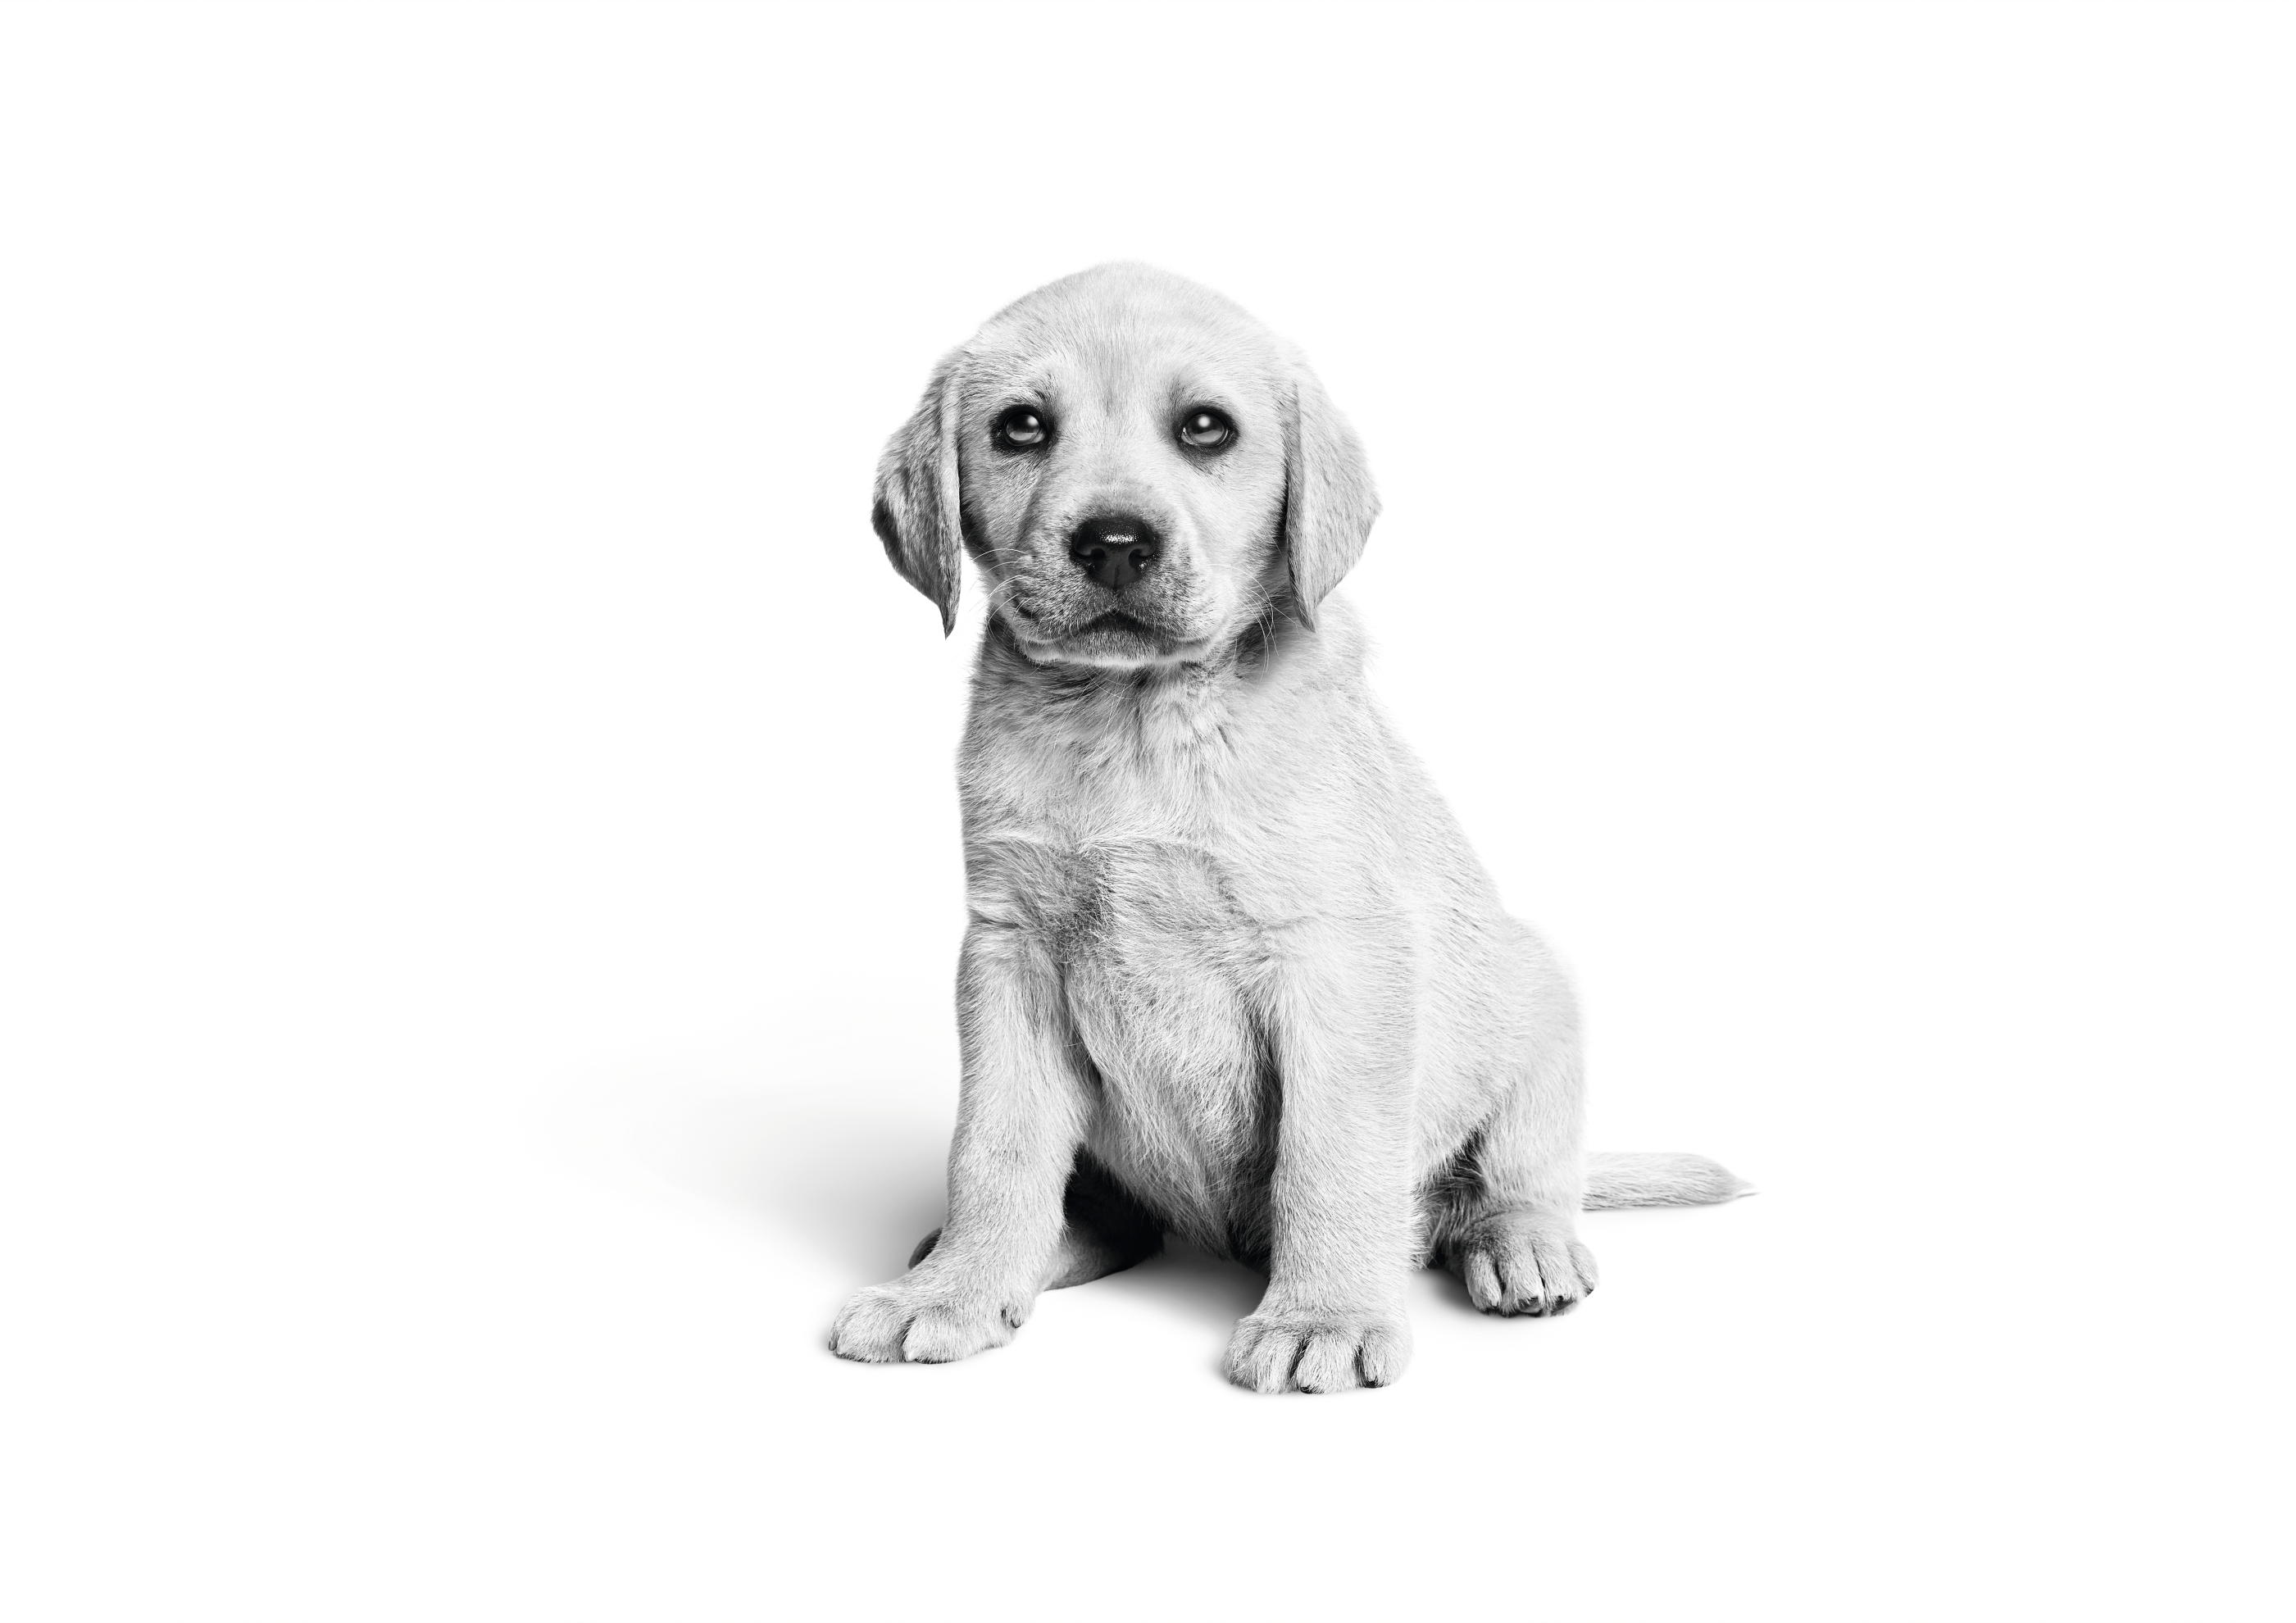 Labrador Retriever puppy sitting in black and white on a white background